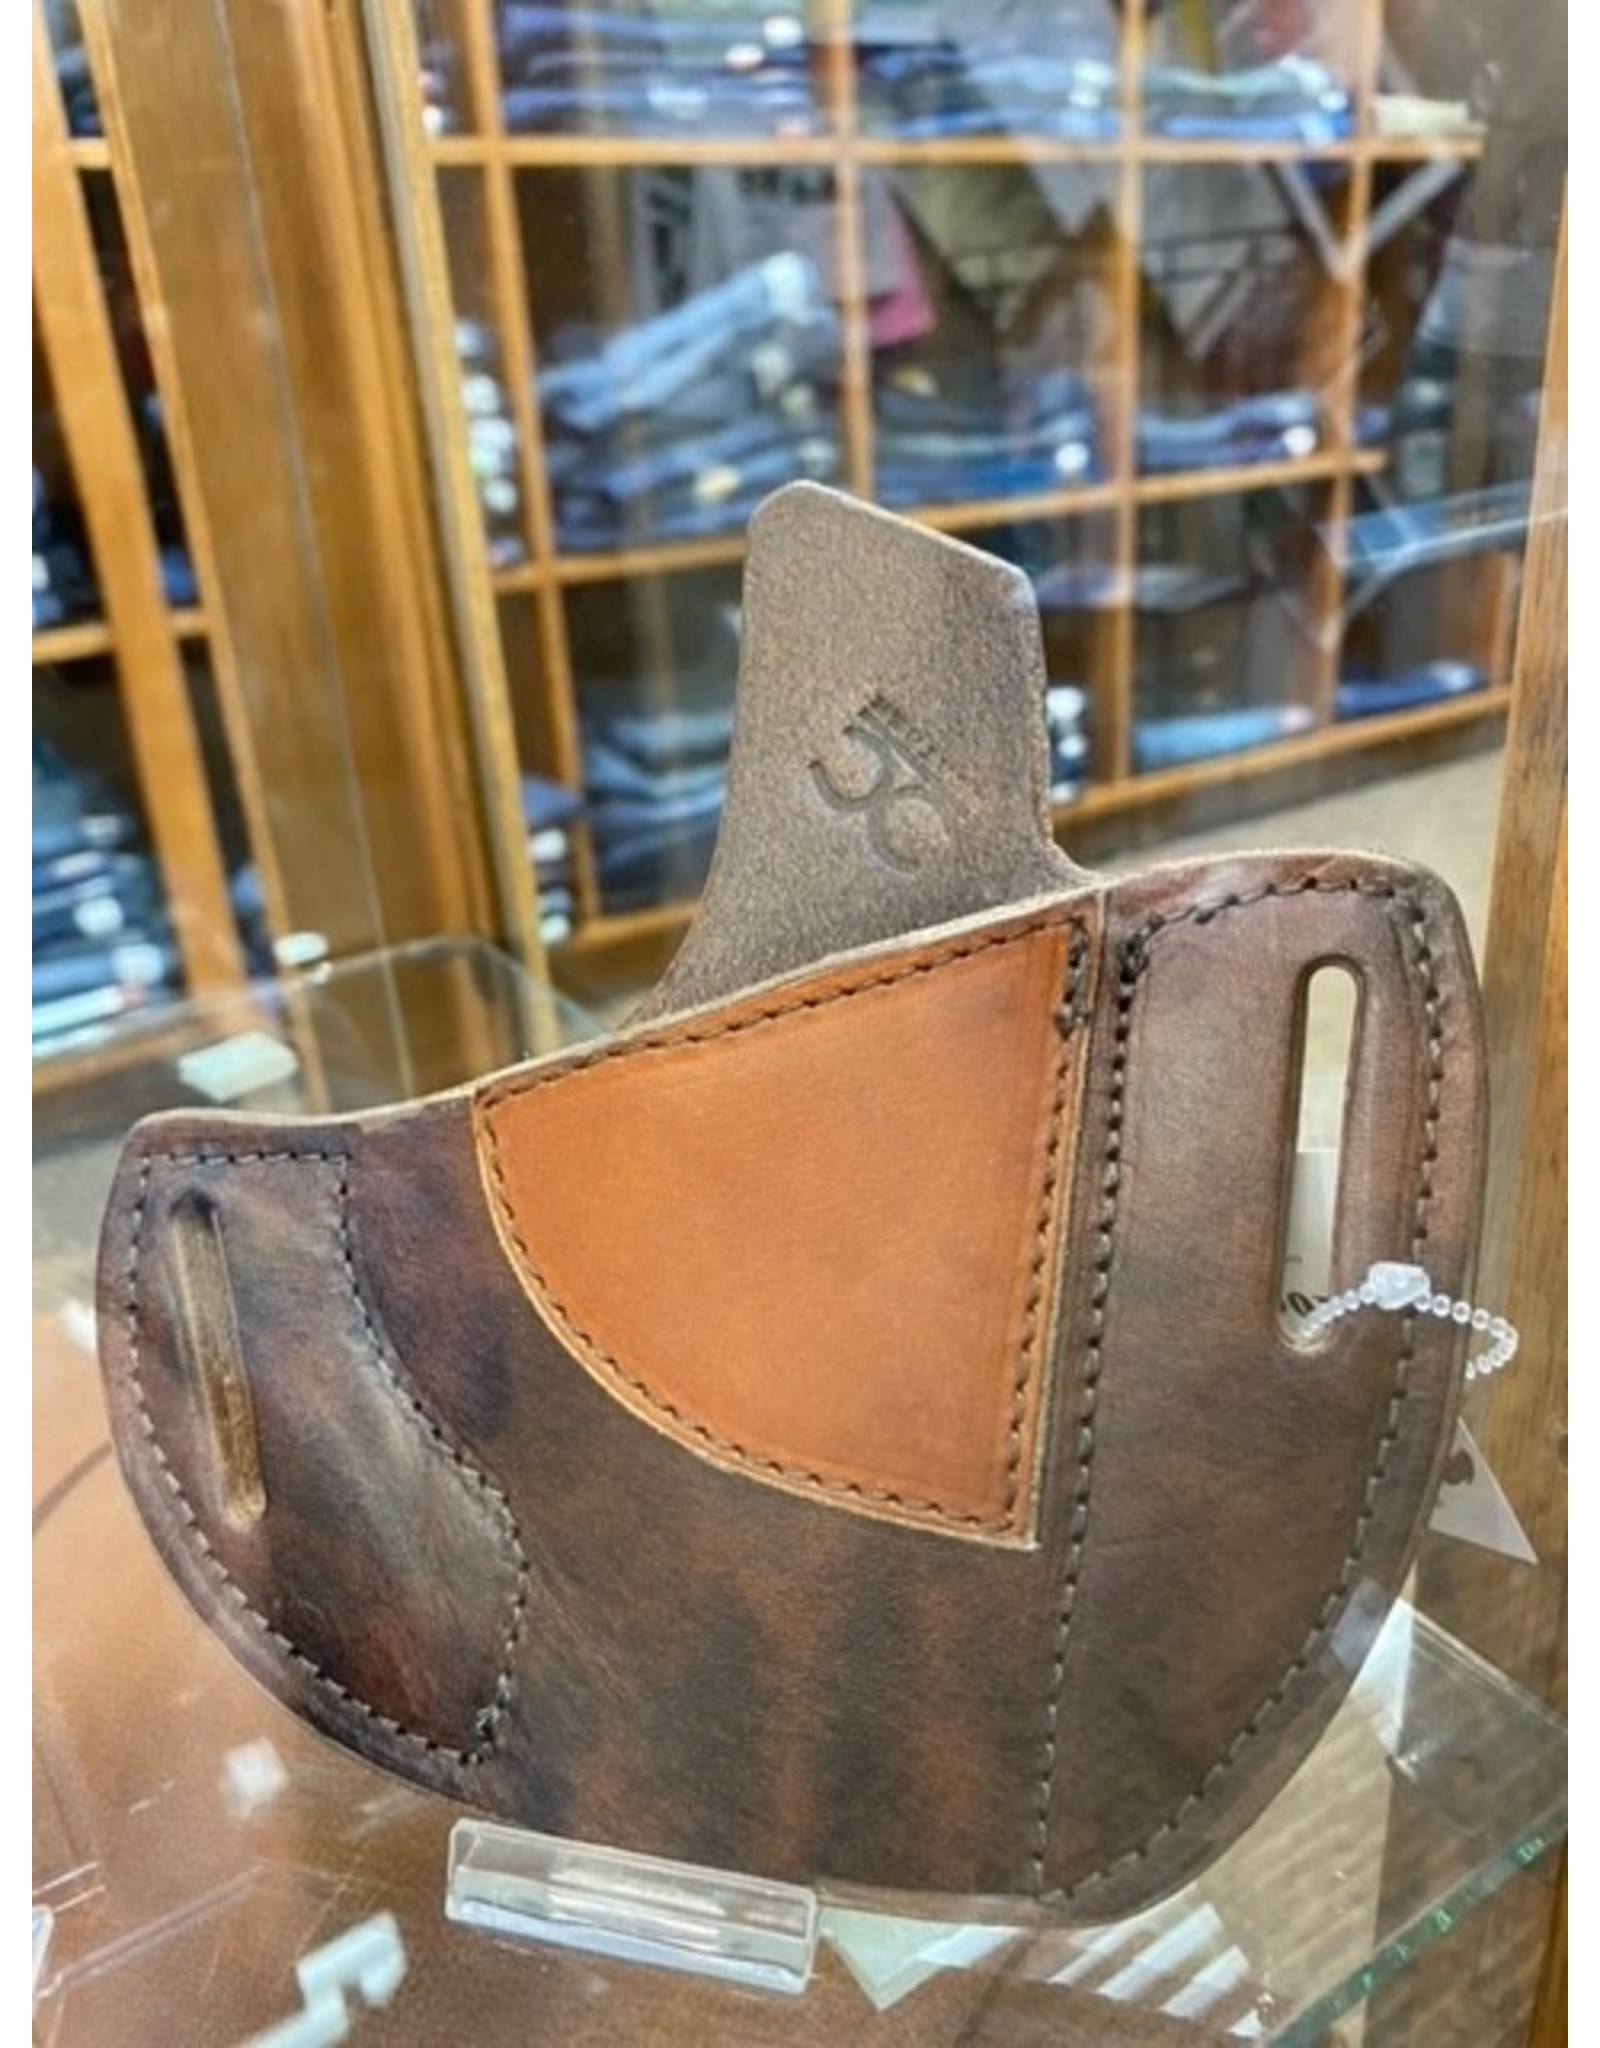 Chase Combs Leather Two-Tone Gun Holster